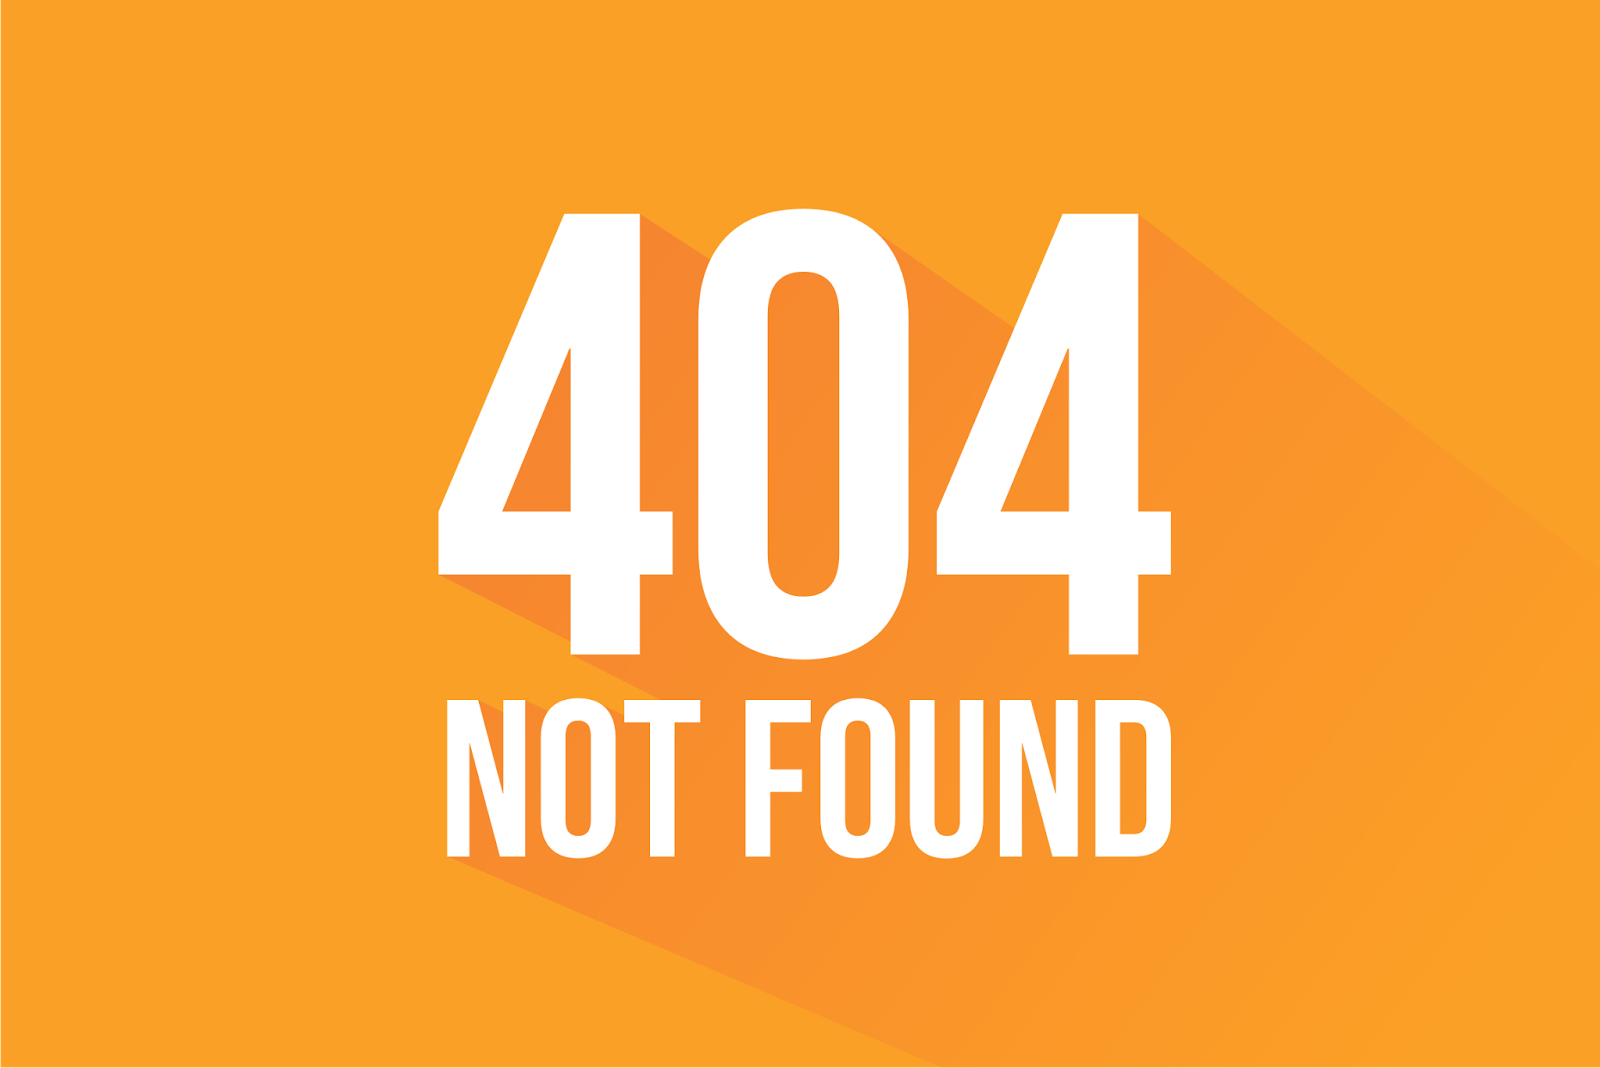 404 Not found. Картинка not found. 404 Нот фаунд. Картинка 404. Shop not found